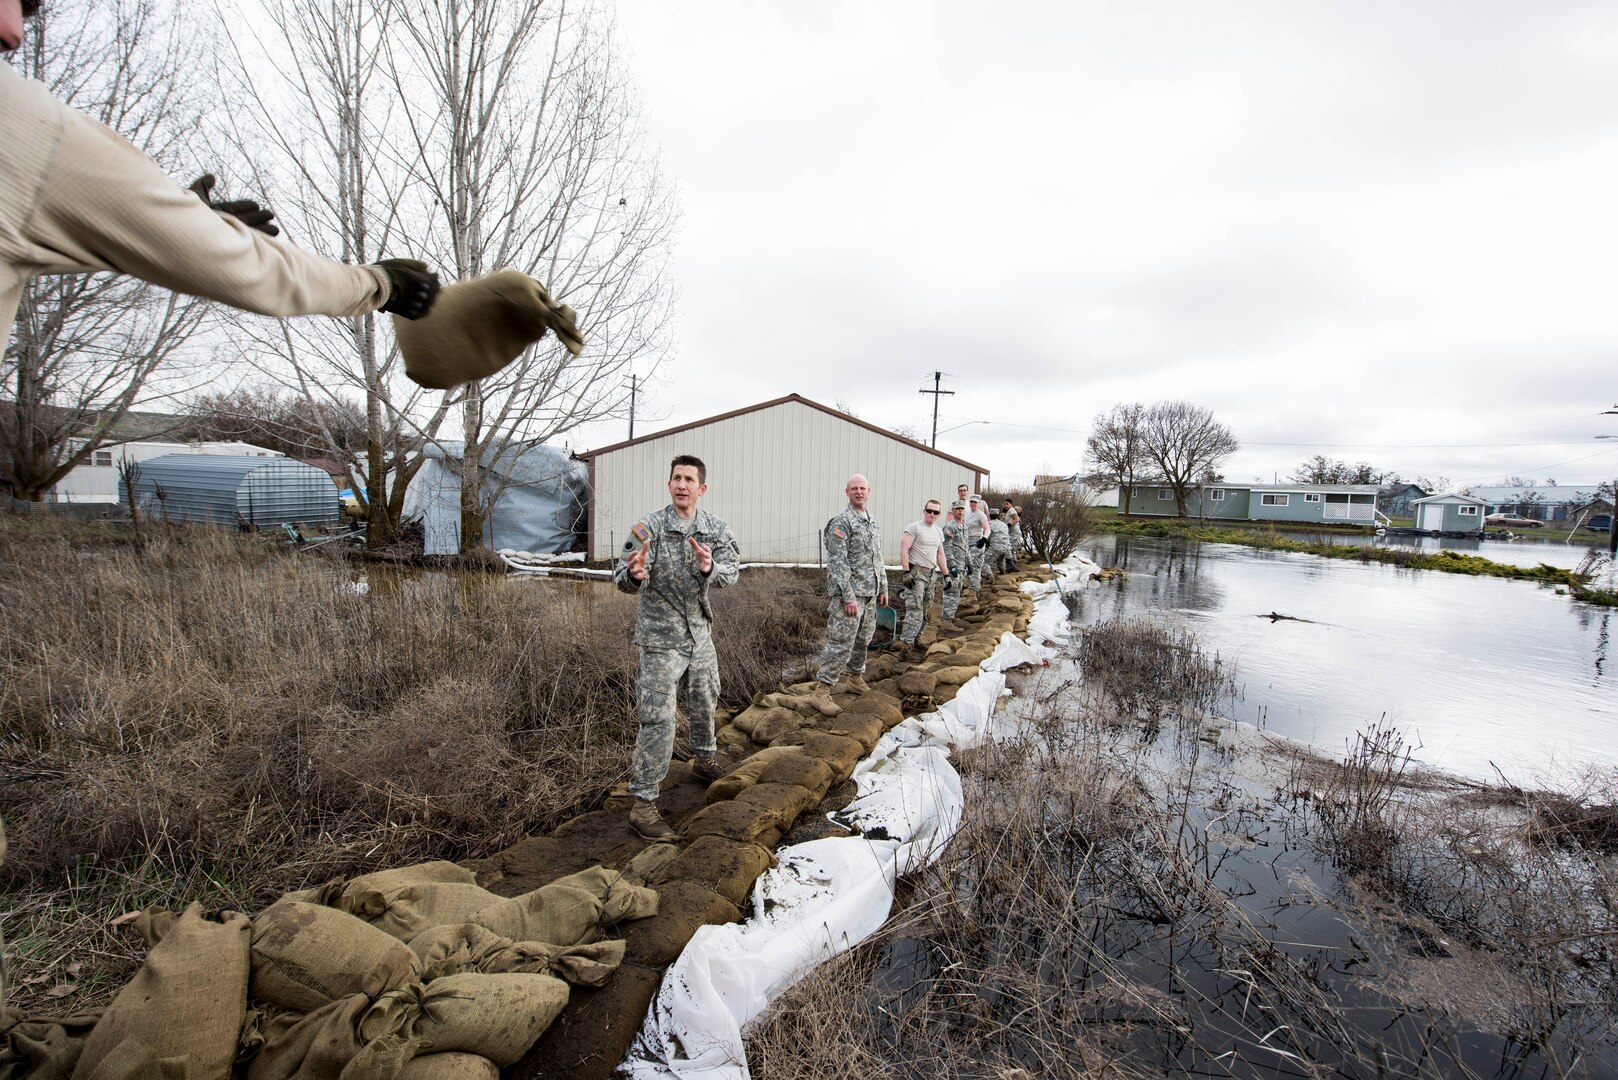 Airmen and Soldiers of the Washington National Guard assist with sandbagging during the 2017 flooding in Sprague, Wash.